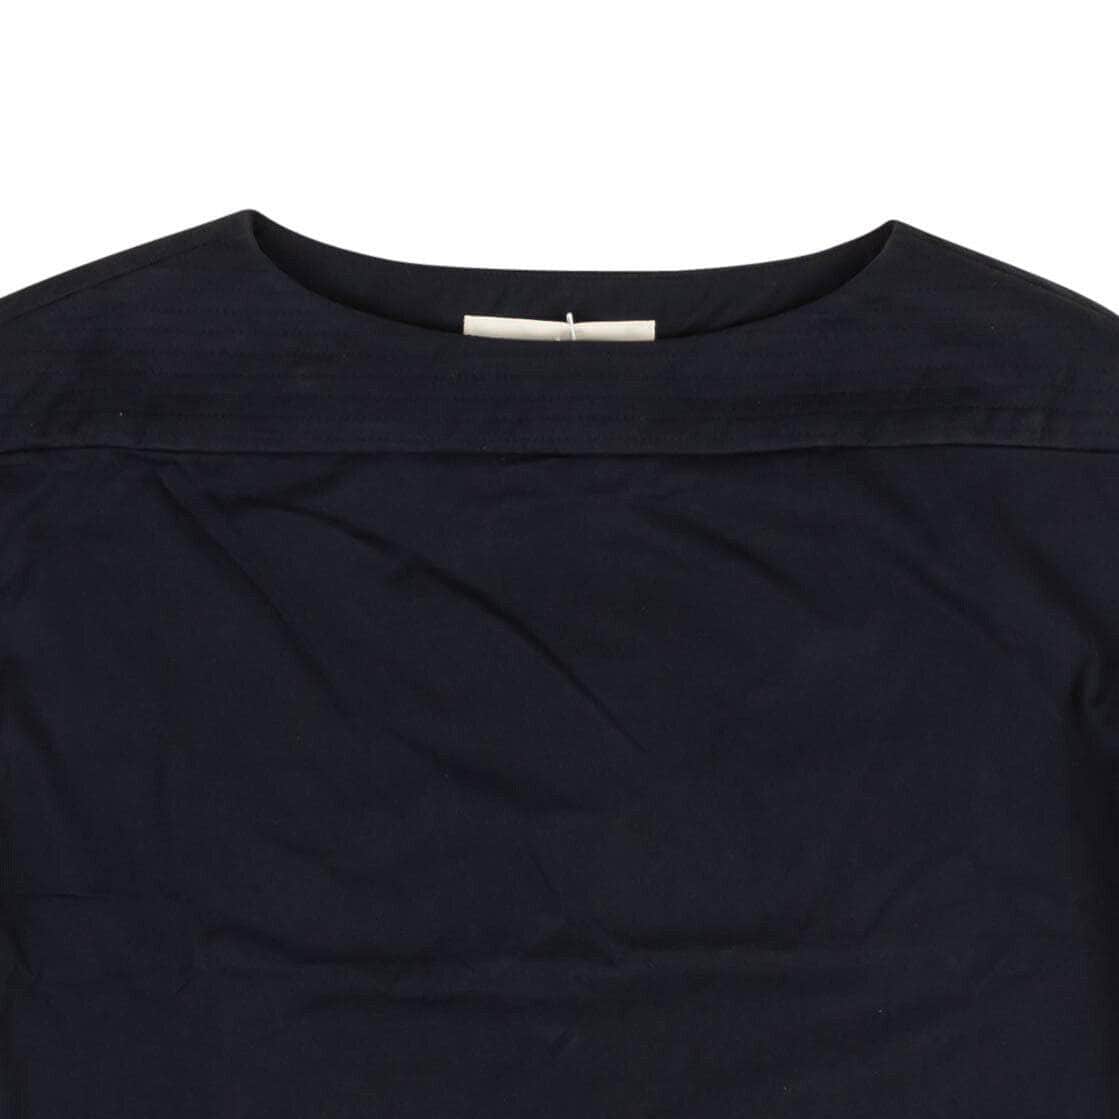 A_Plan_Application a_plan_application, channelenable-all, chicmi, couponcollection, gender-womens, main-clothing, size-s, under-250 S Navy Blue Quilted Top 95-APA-1001/S 95-APA-1001/S